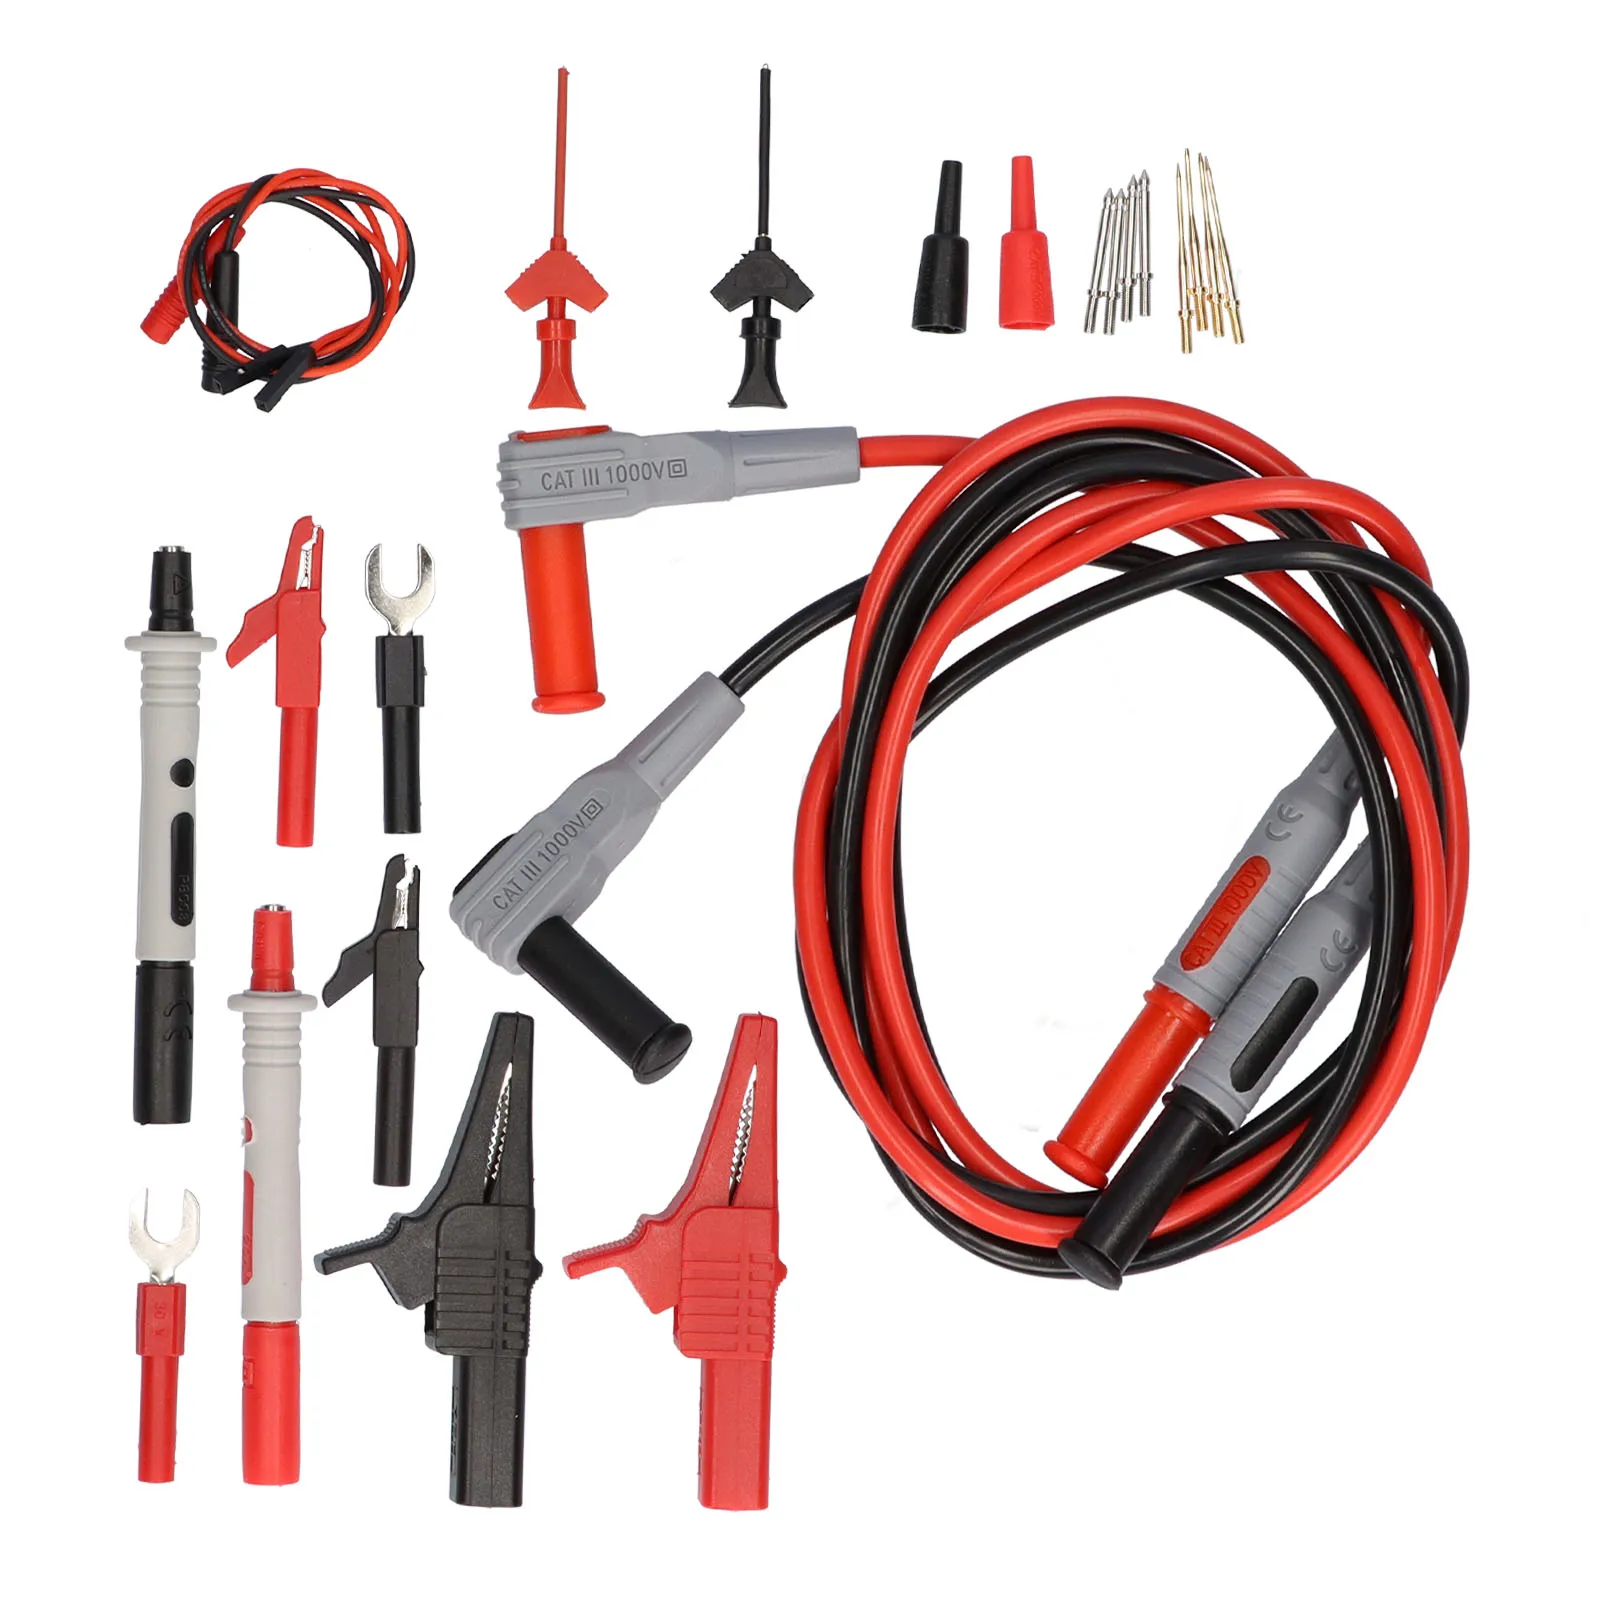 

P1300D Multimeter Test Leads Kit 1000V 10A Replaceable with 4mm Banana Plugs & Alligator Clips & Test Hooks & Test Probes Set